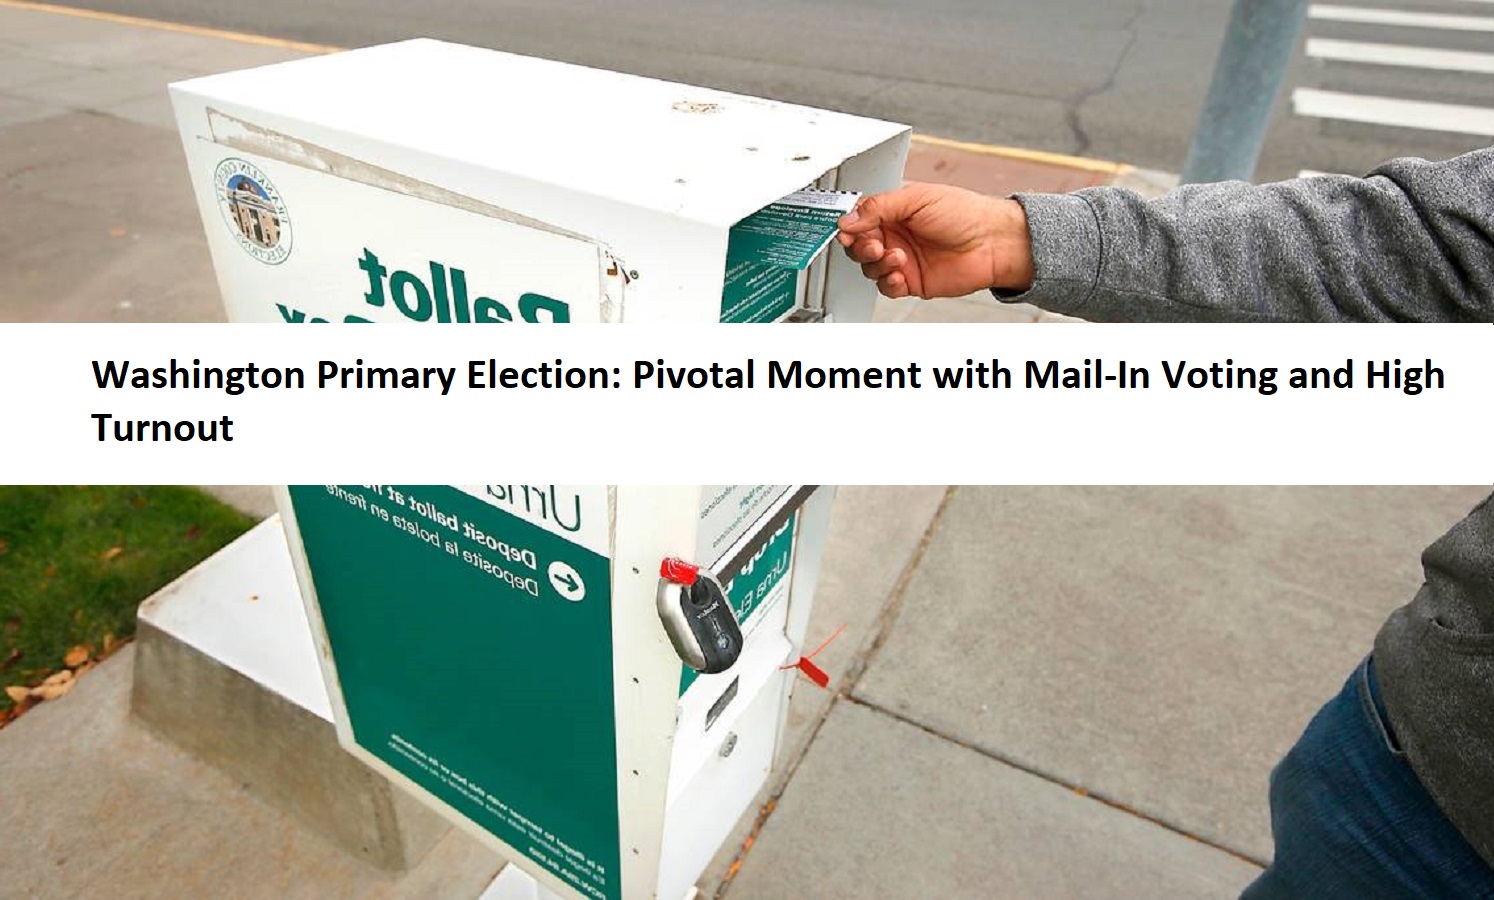 Washington Primary Election: Pivotal Moment with Mail-In Voting and High Turnout